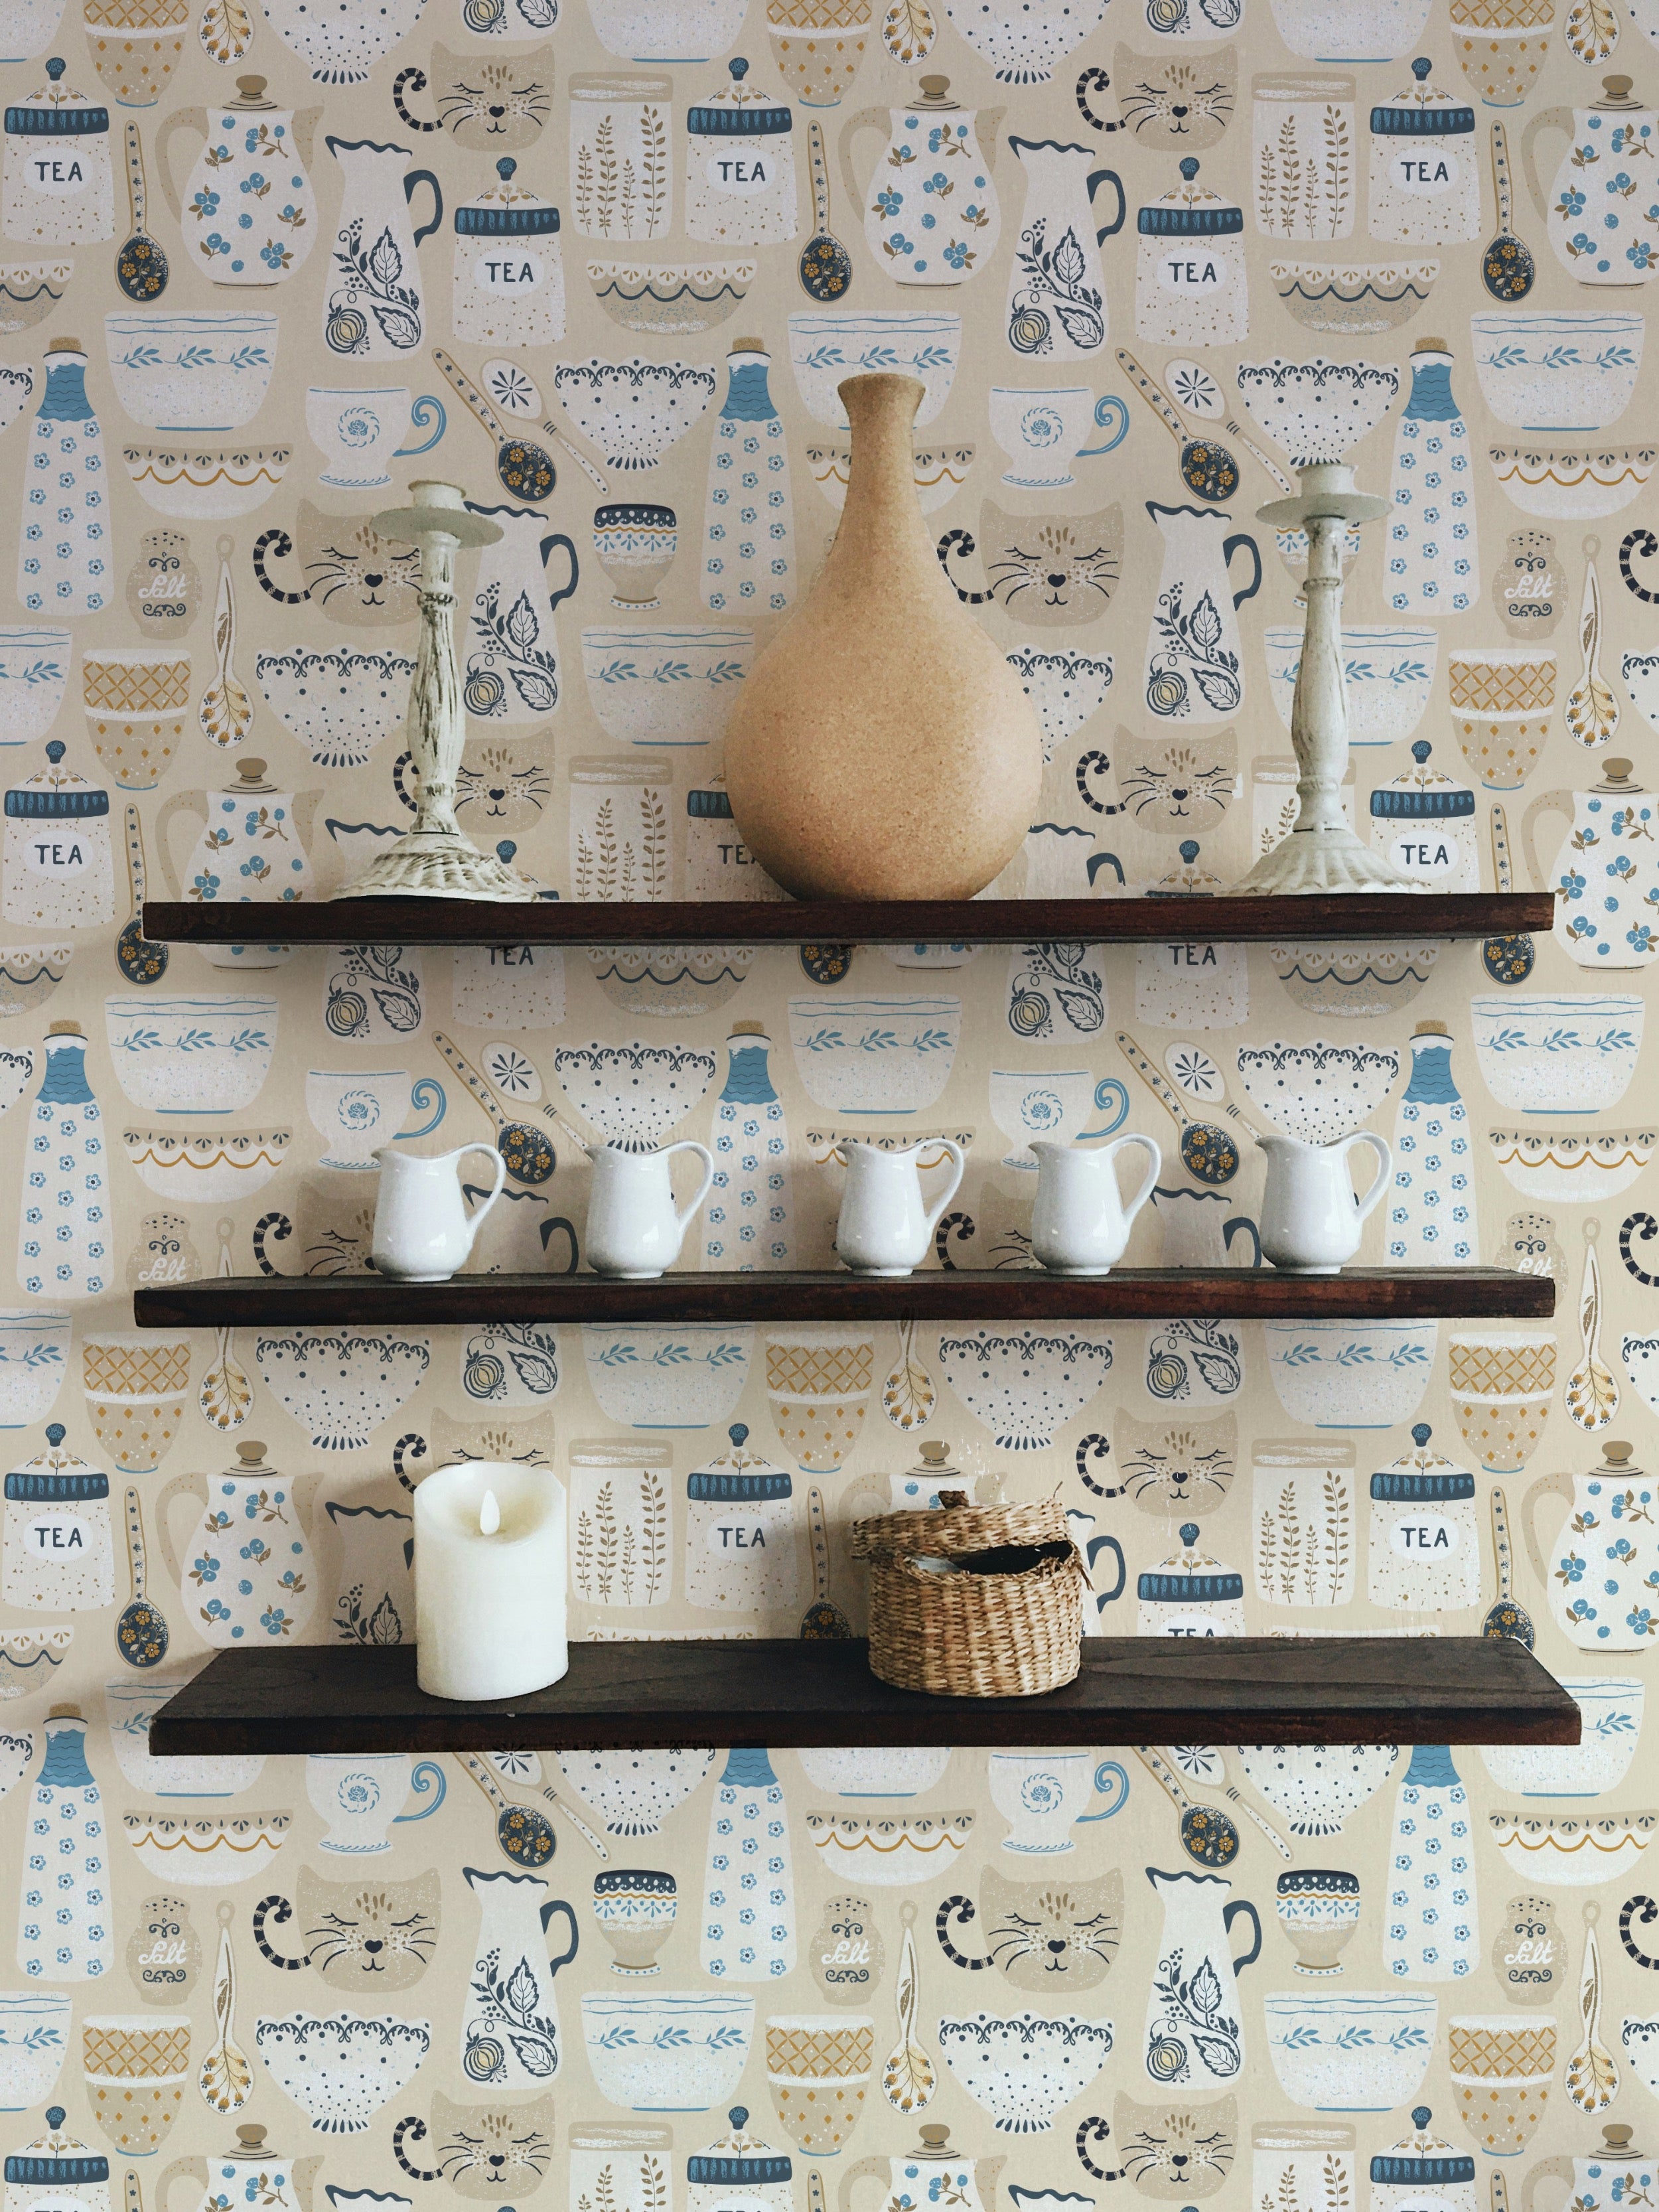 A detailed shot of a room adorned with 'Spring Ceramics Wallpaper', focusing on the wallpaper pattern featuring stylized teapots, cups, and botanical elements. The room is styled with simple, elegant decor that emphasizes the wallpaper's role as a focal point in interior design.